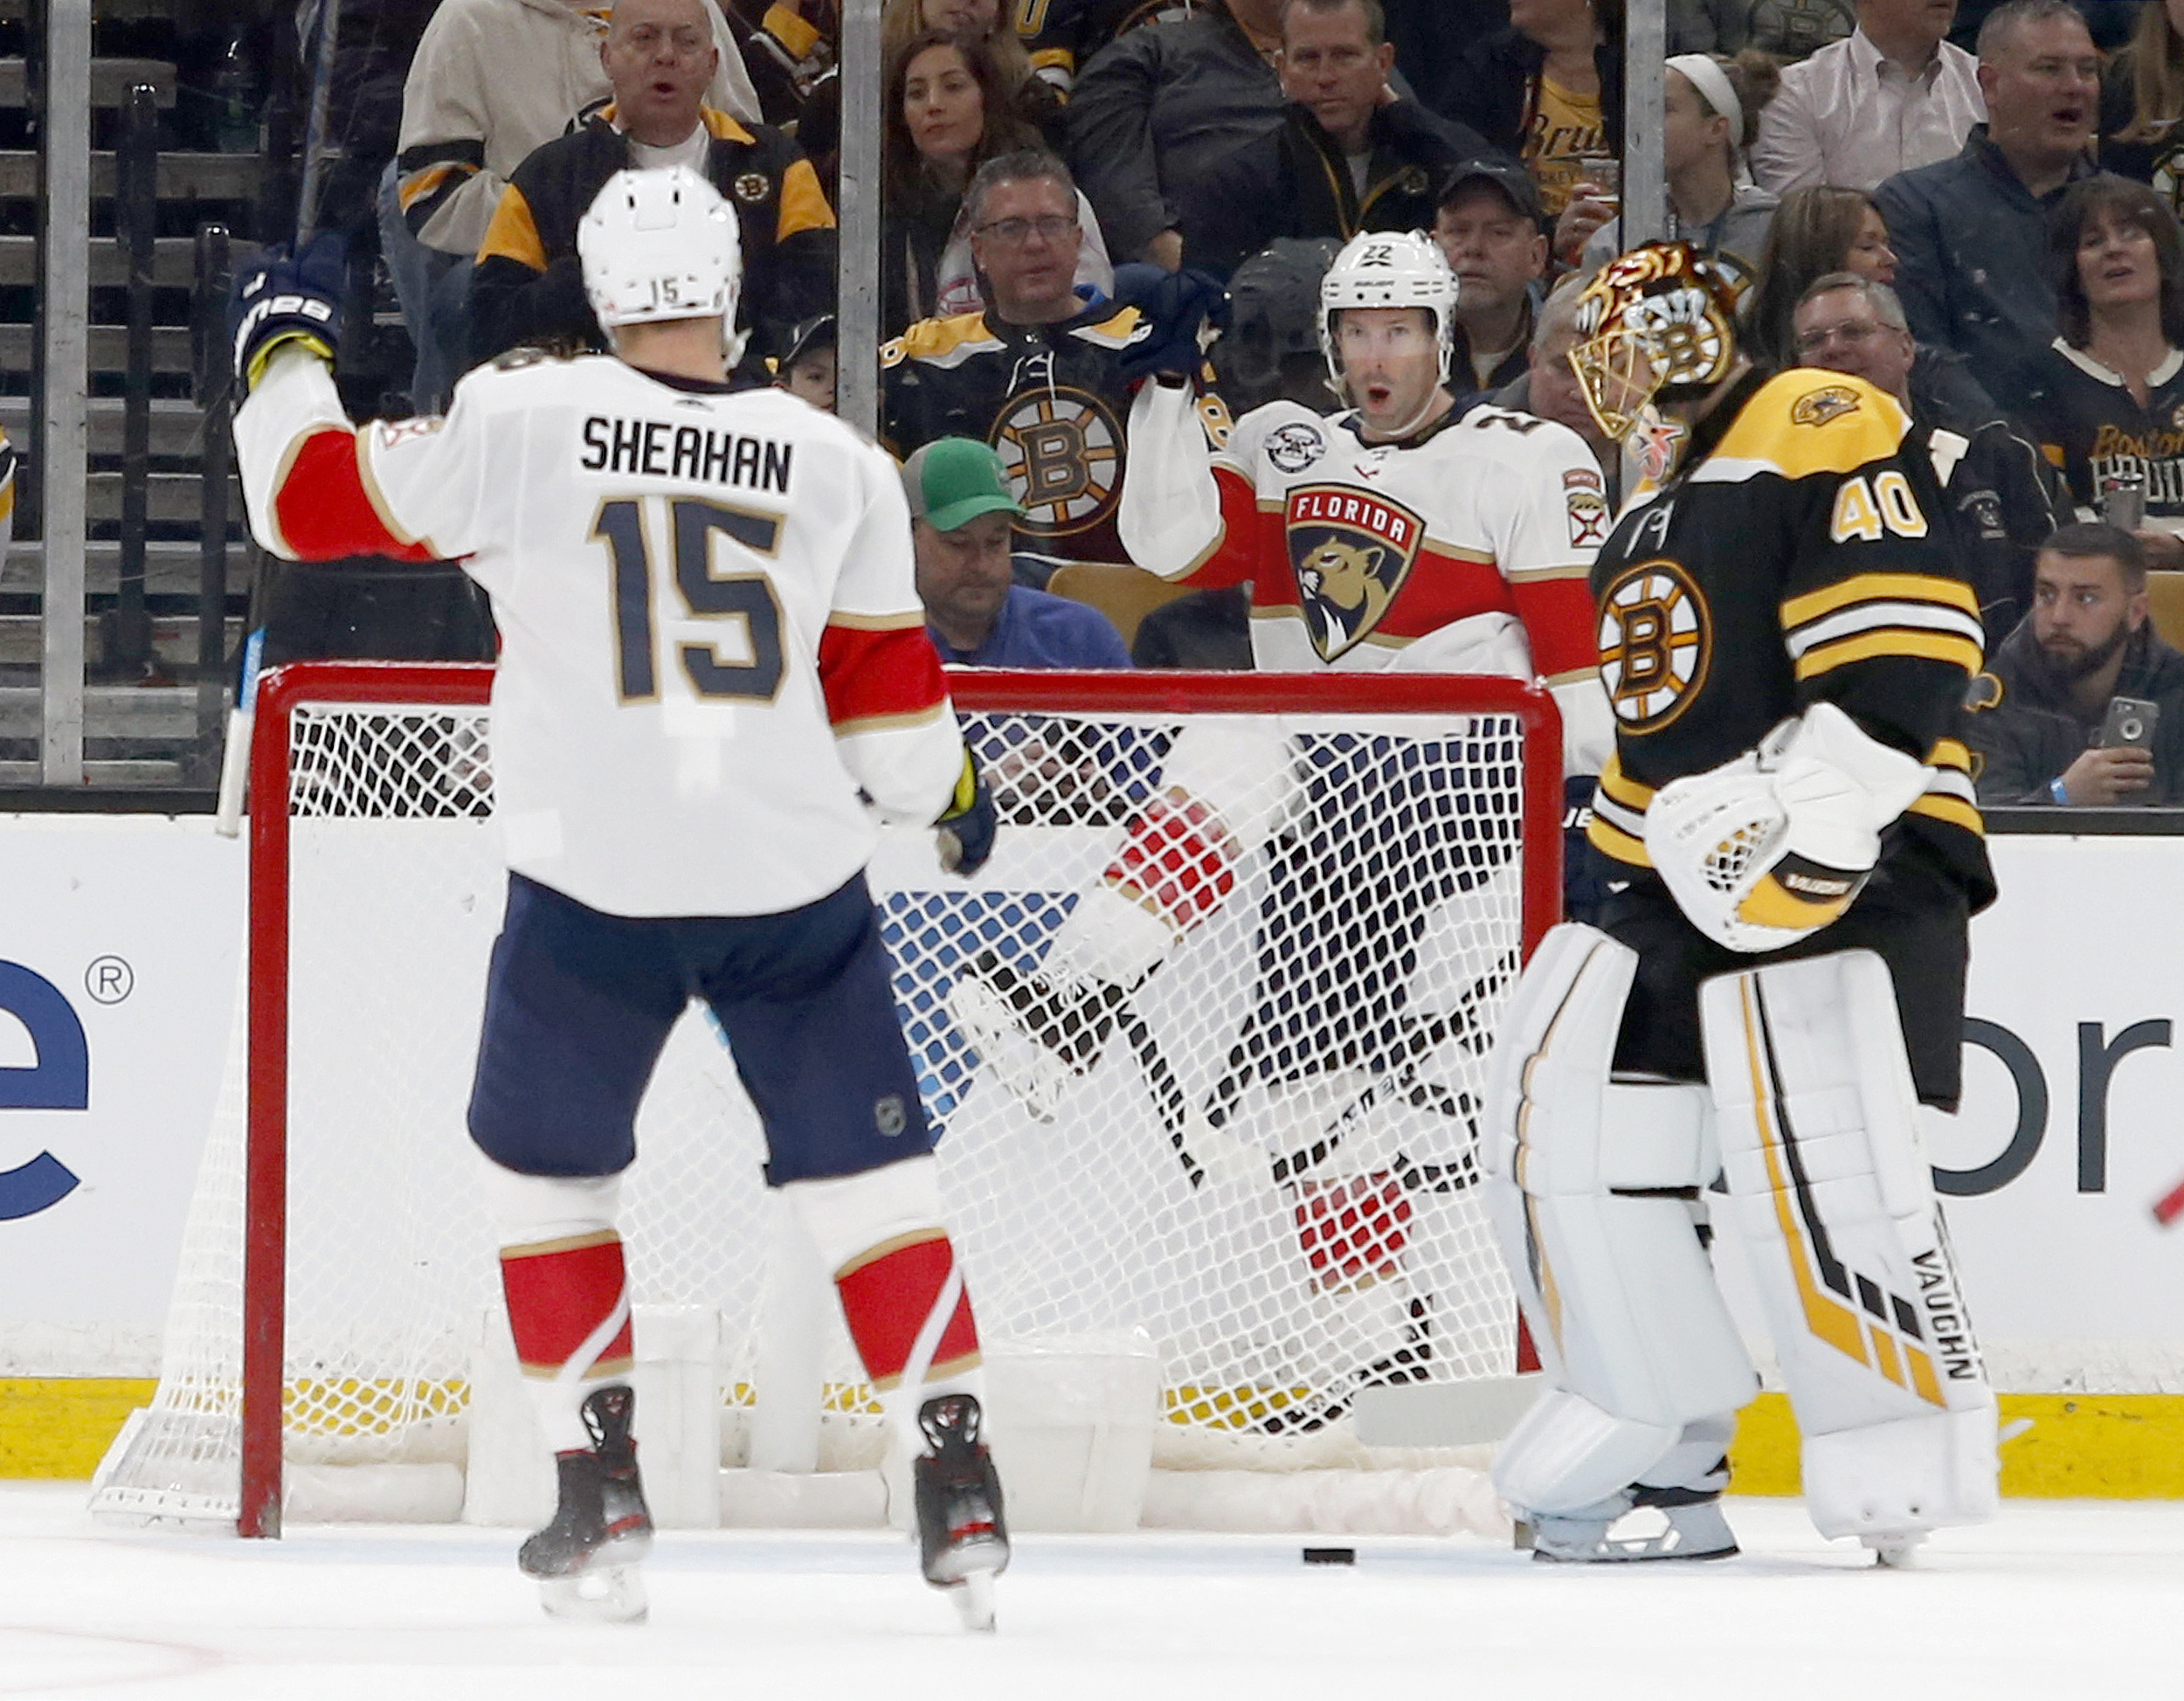 Panthers end Bruins’ home winning streak at 12